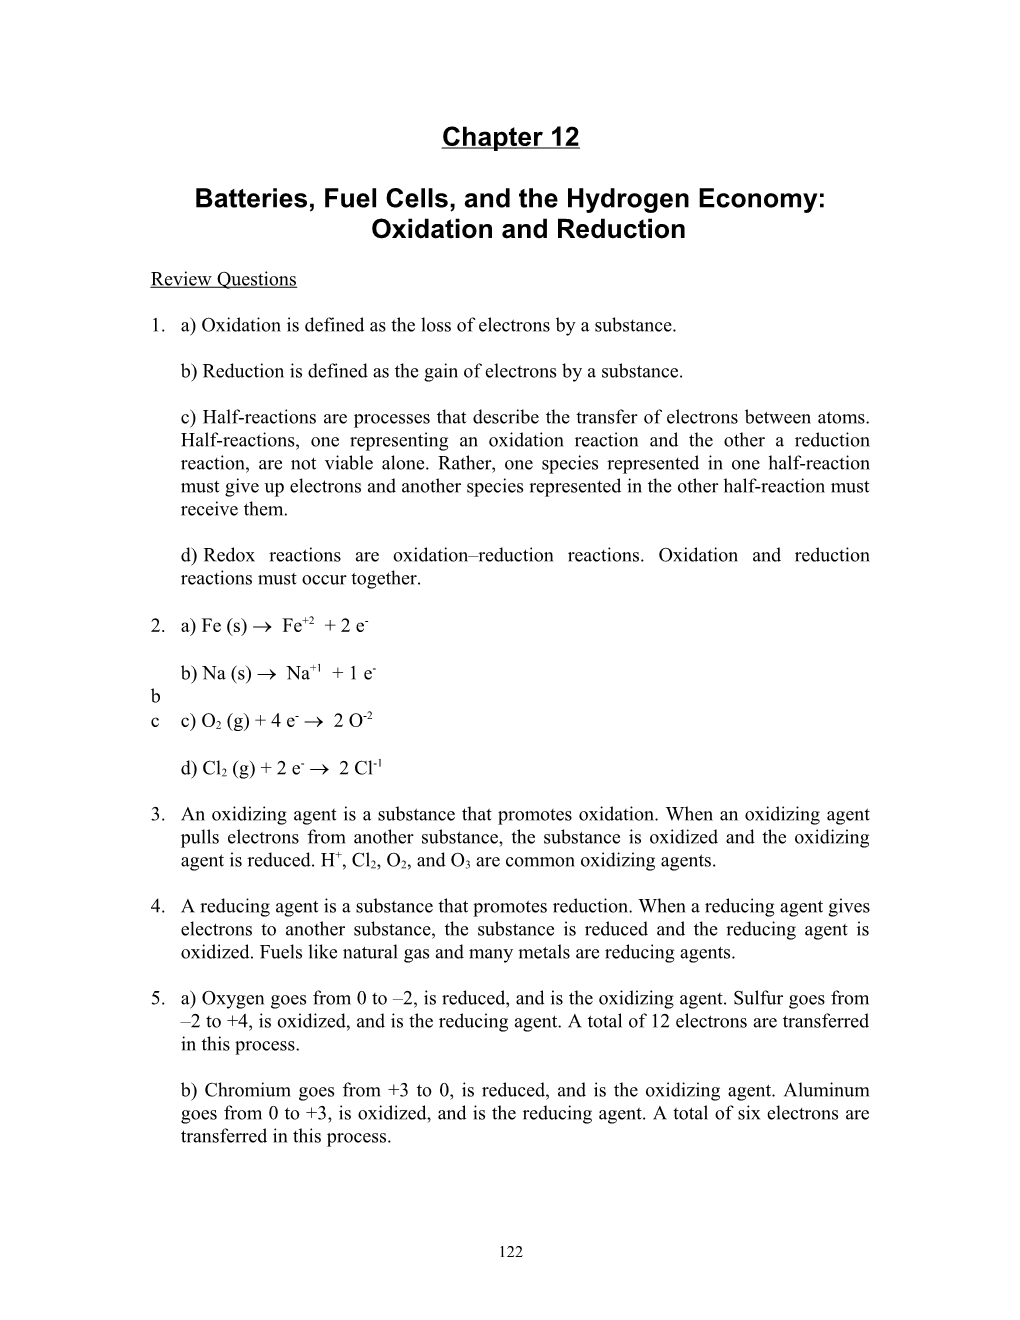 Batteries, Fuel Cells, and the Hydrogen Economy: Oxidation and Reduction